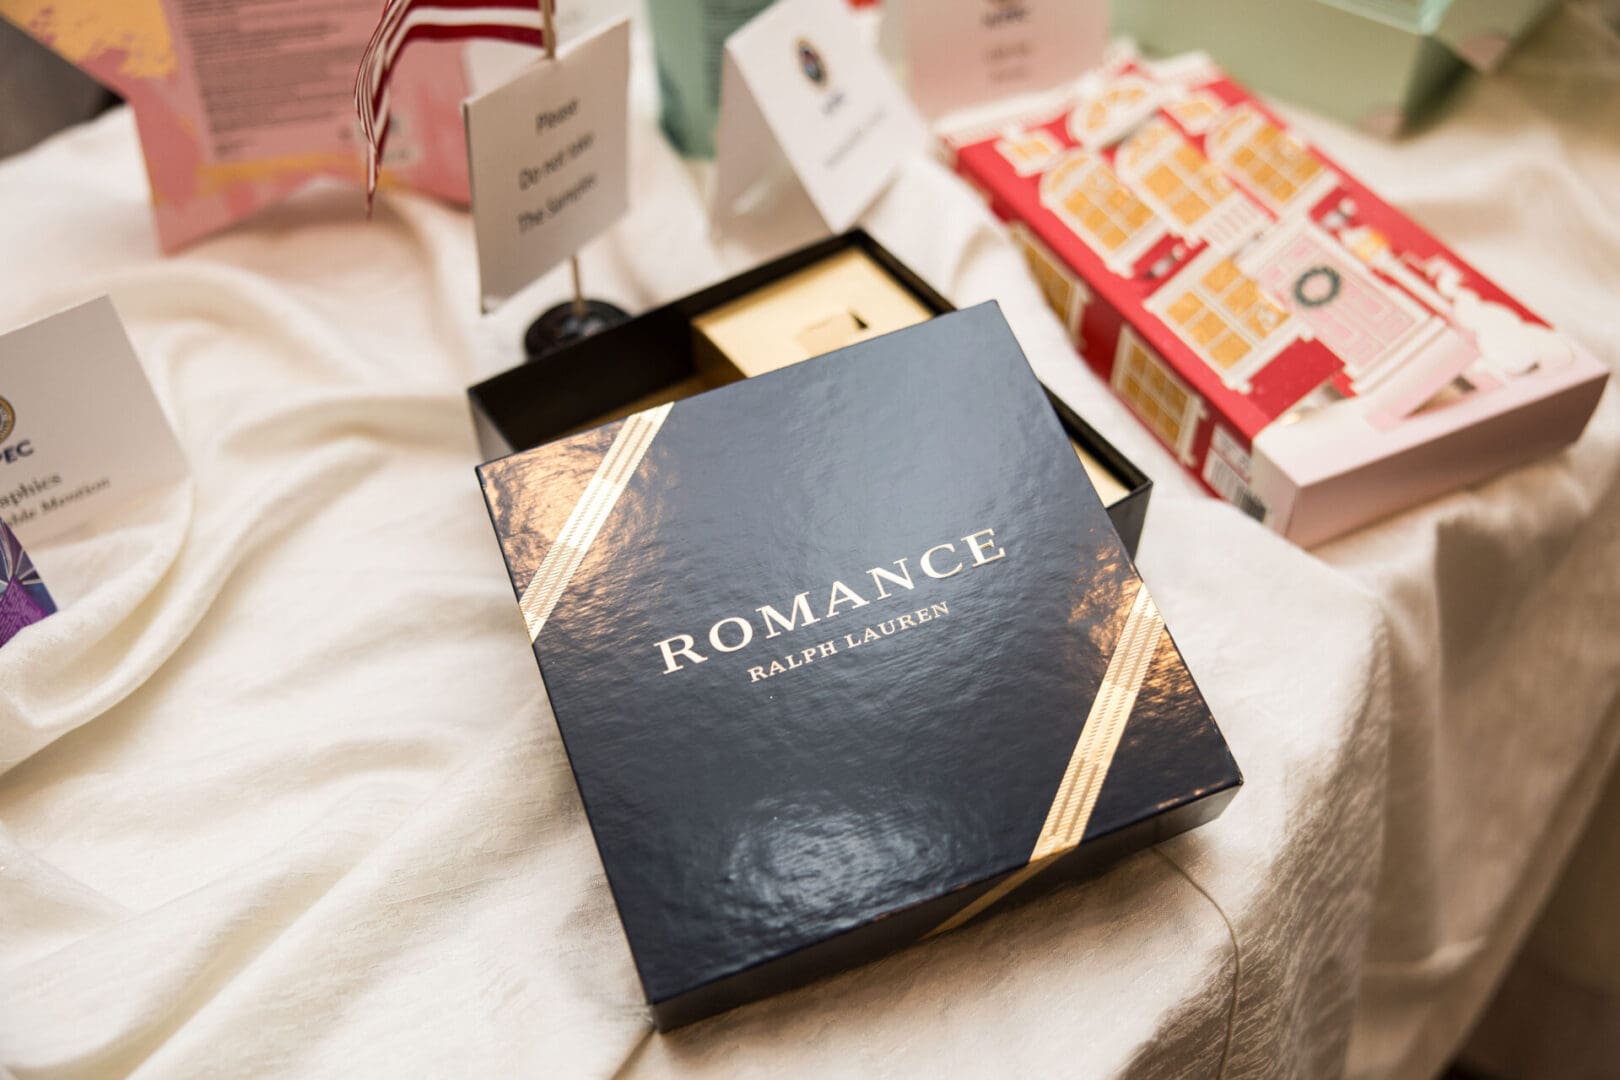 A box of romance products on a table.